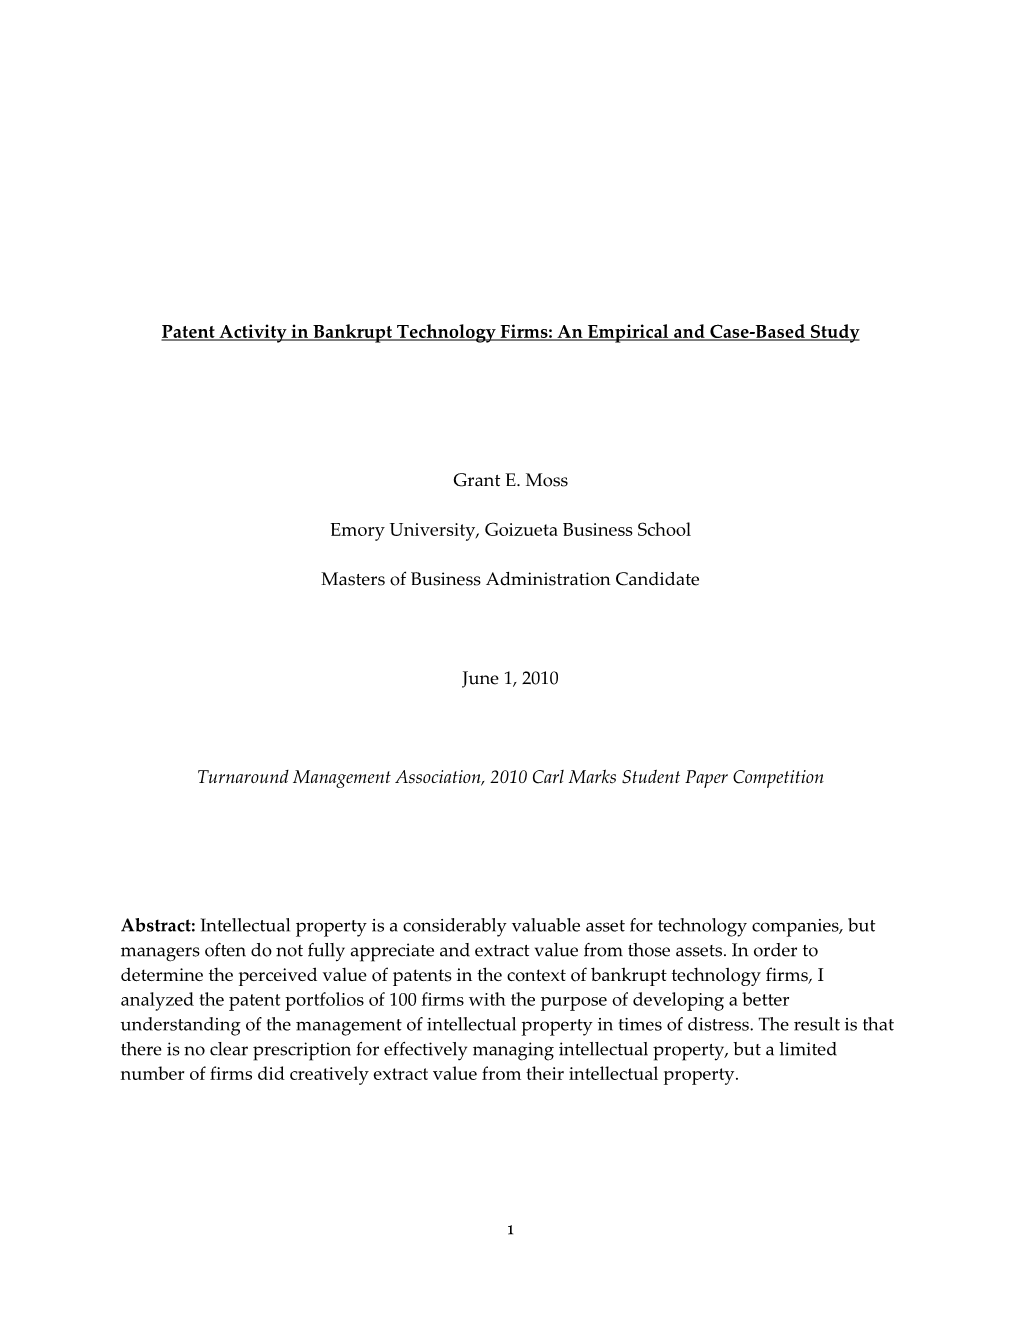 Patent Activity in Bankrupt Technology Firms: an Empirical and Case-Based Study